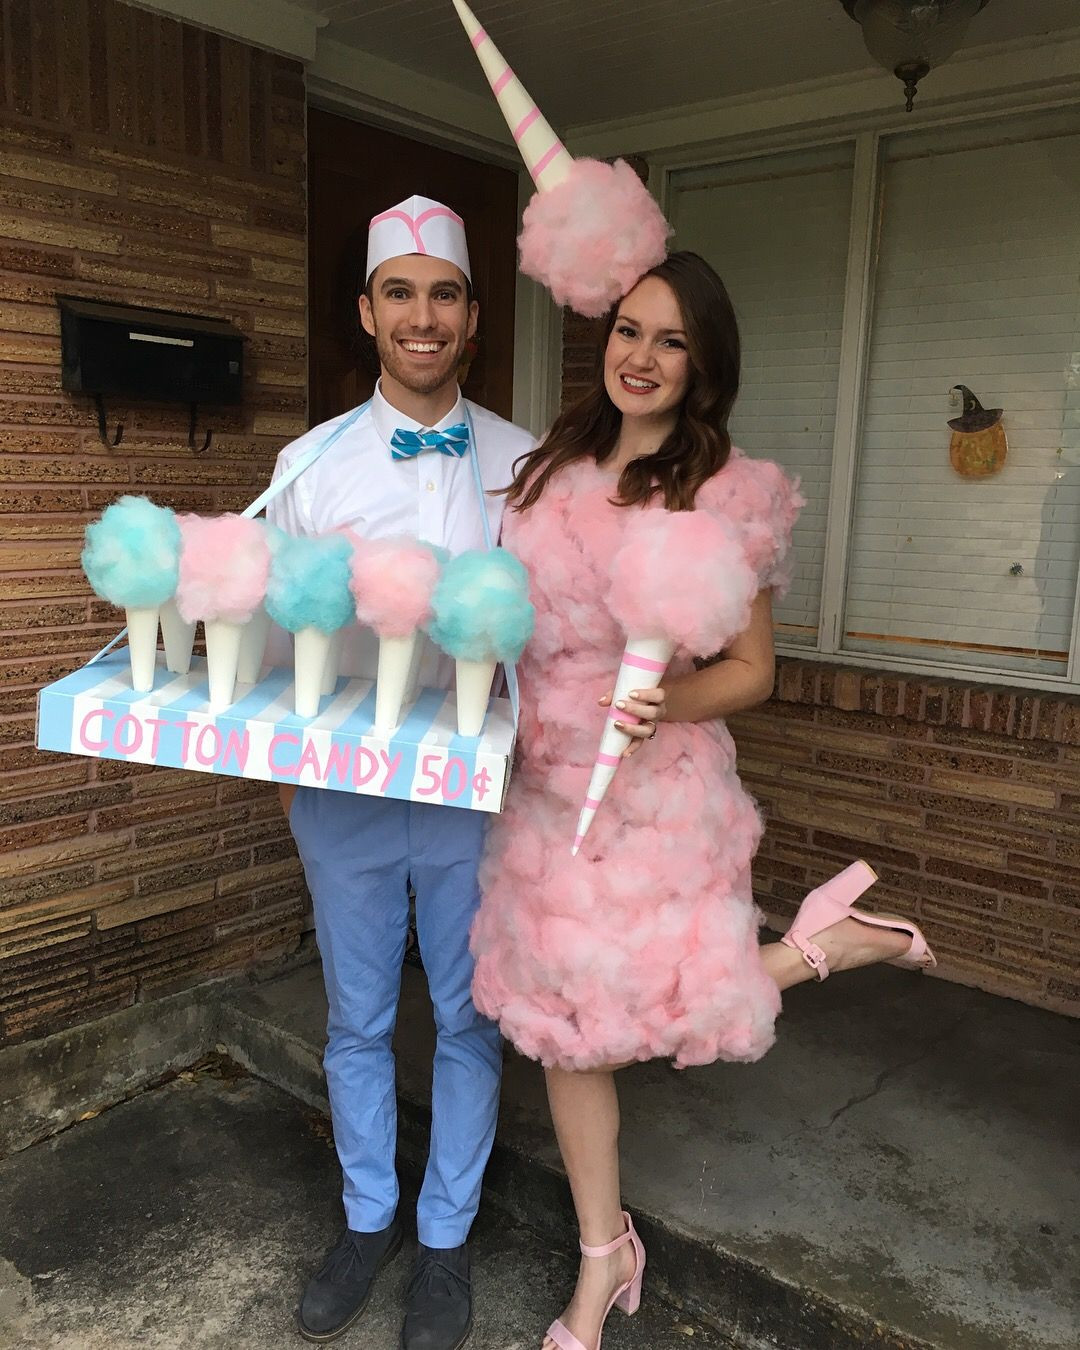 DIY Cotton Candy Costume
 Couples Halloween costume DIY Cotton candy and candy man